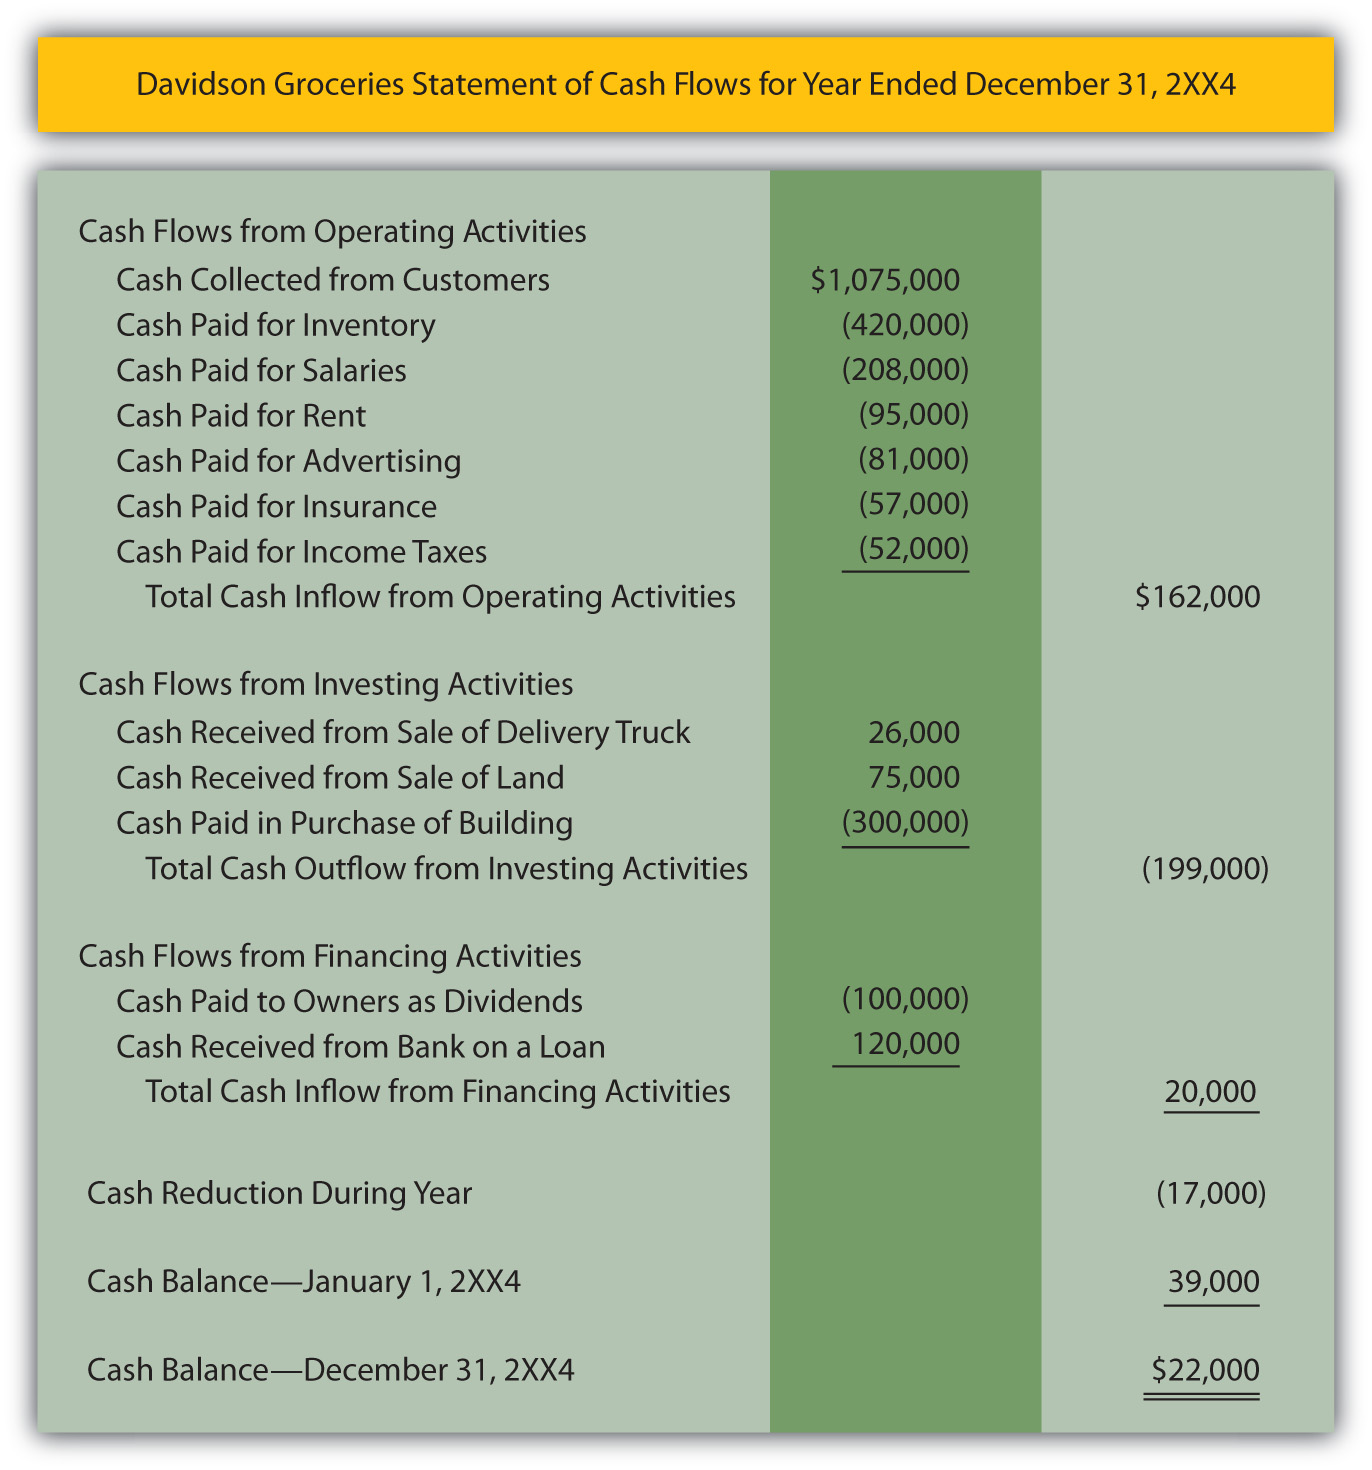 cash flow statement example investing activities include obtaining